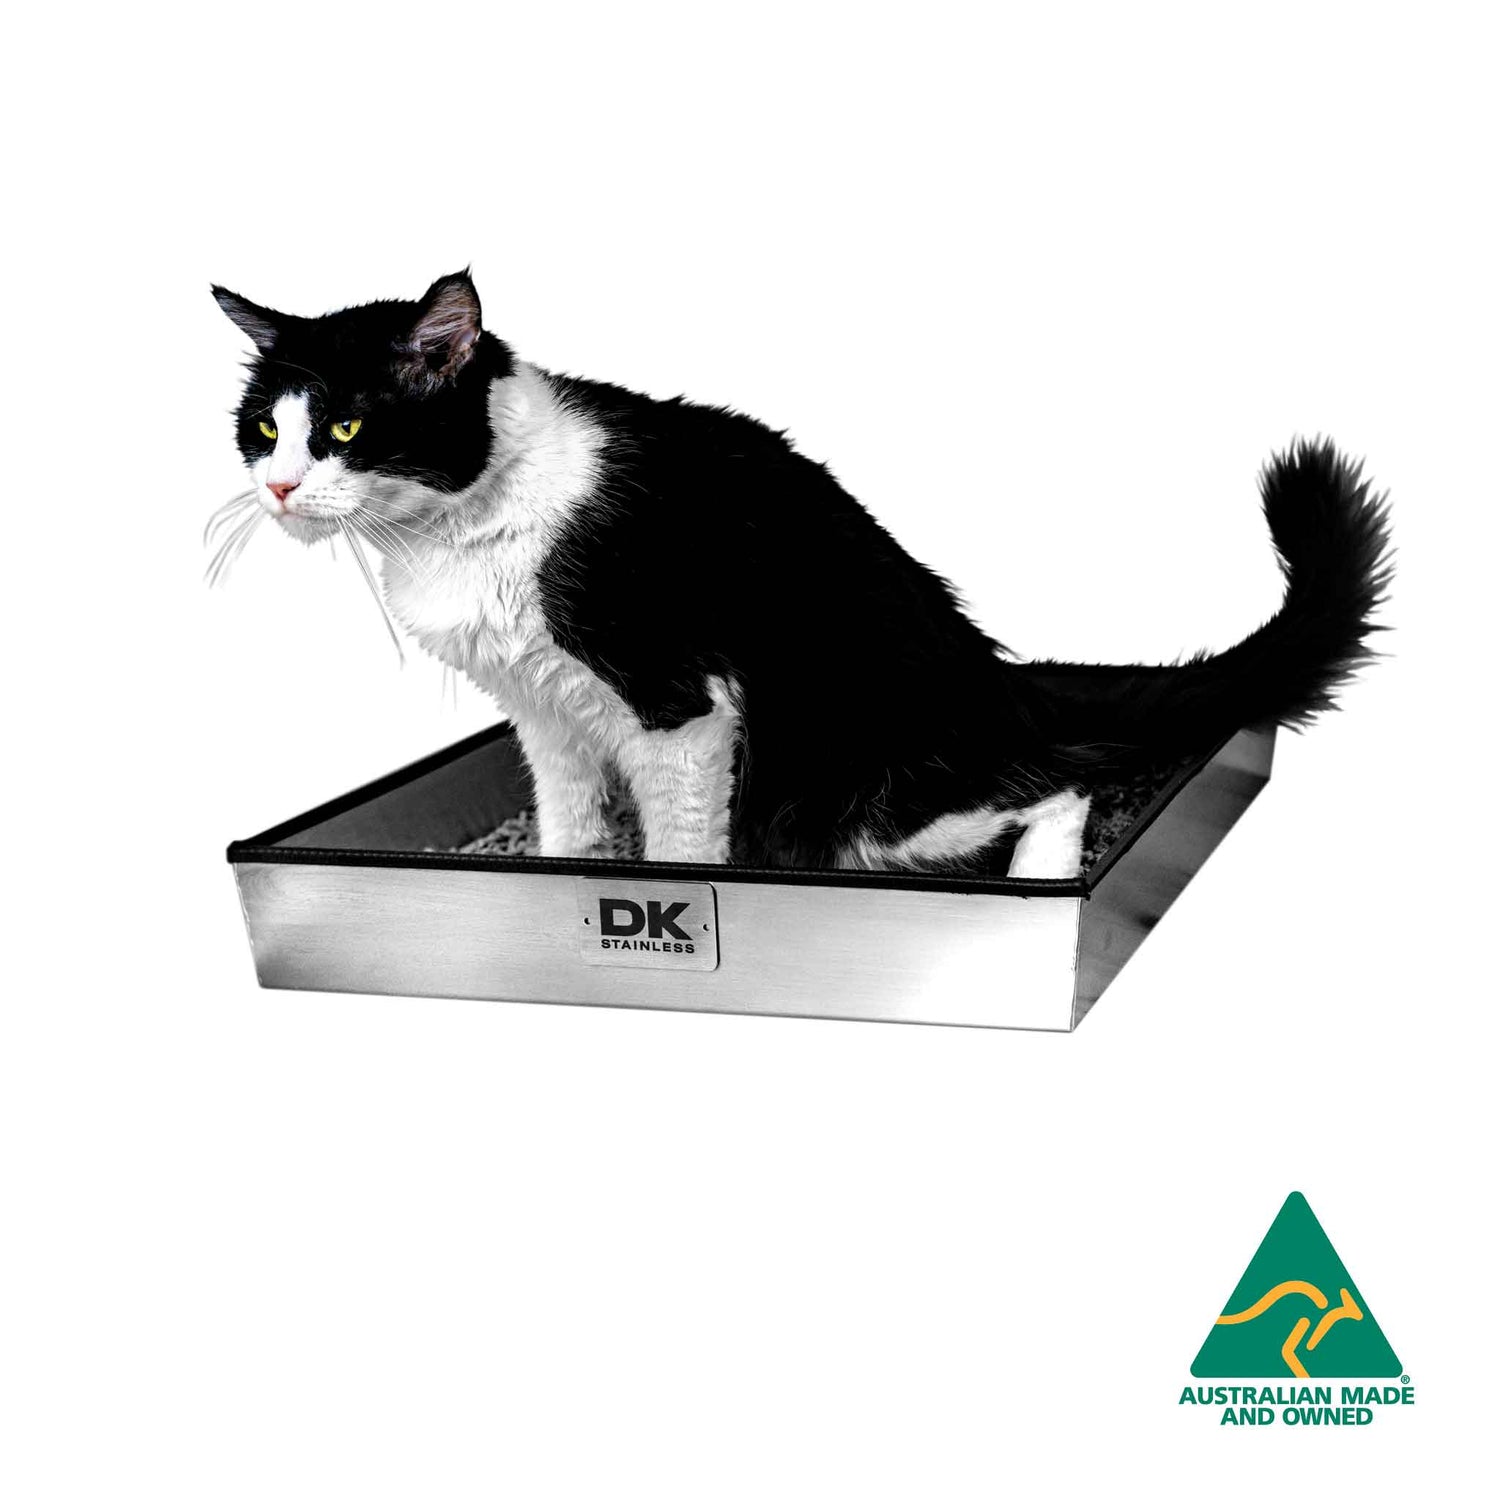 The Stainless Steel Cat Litter Tray